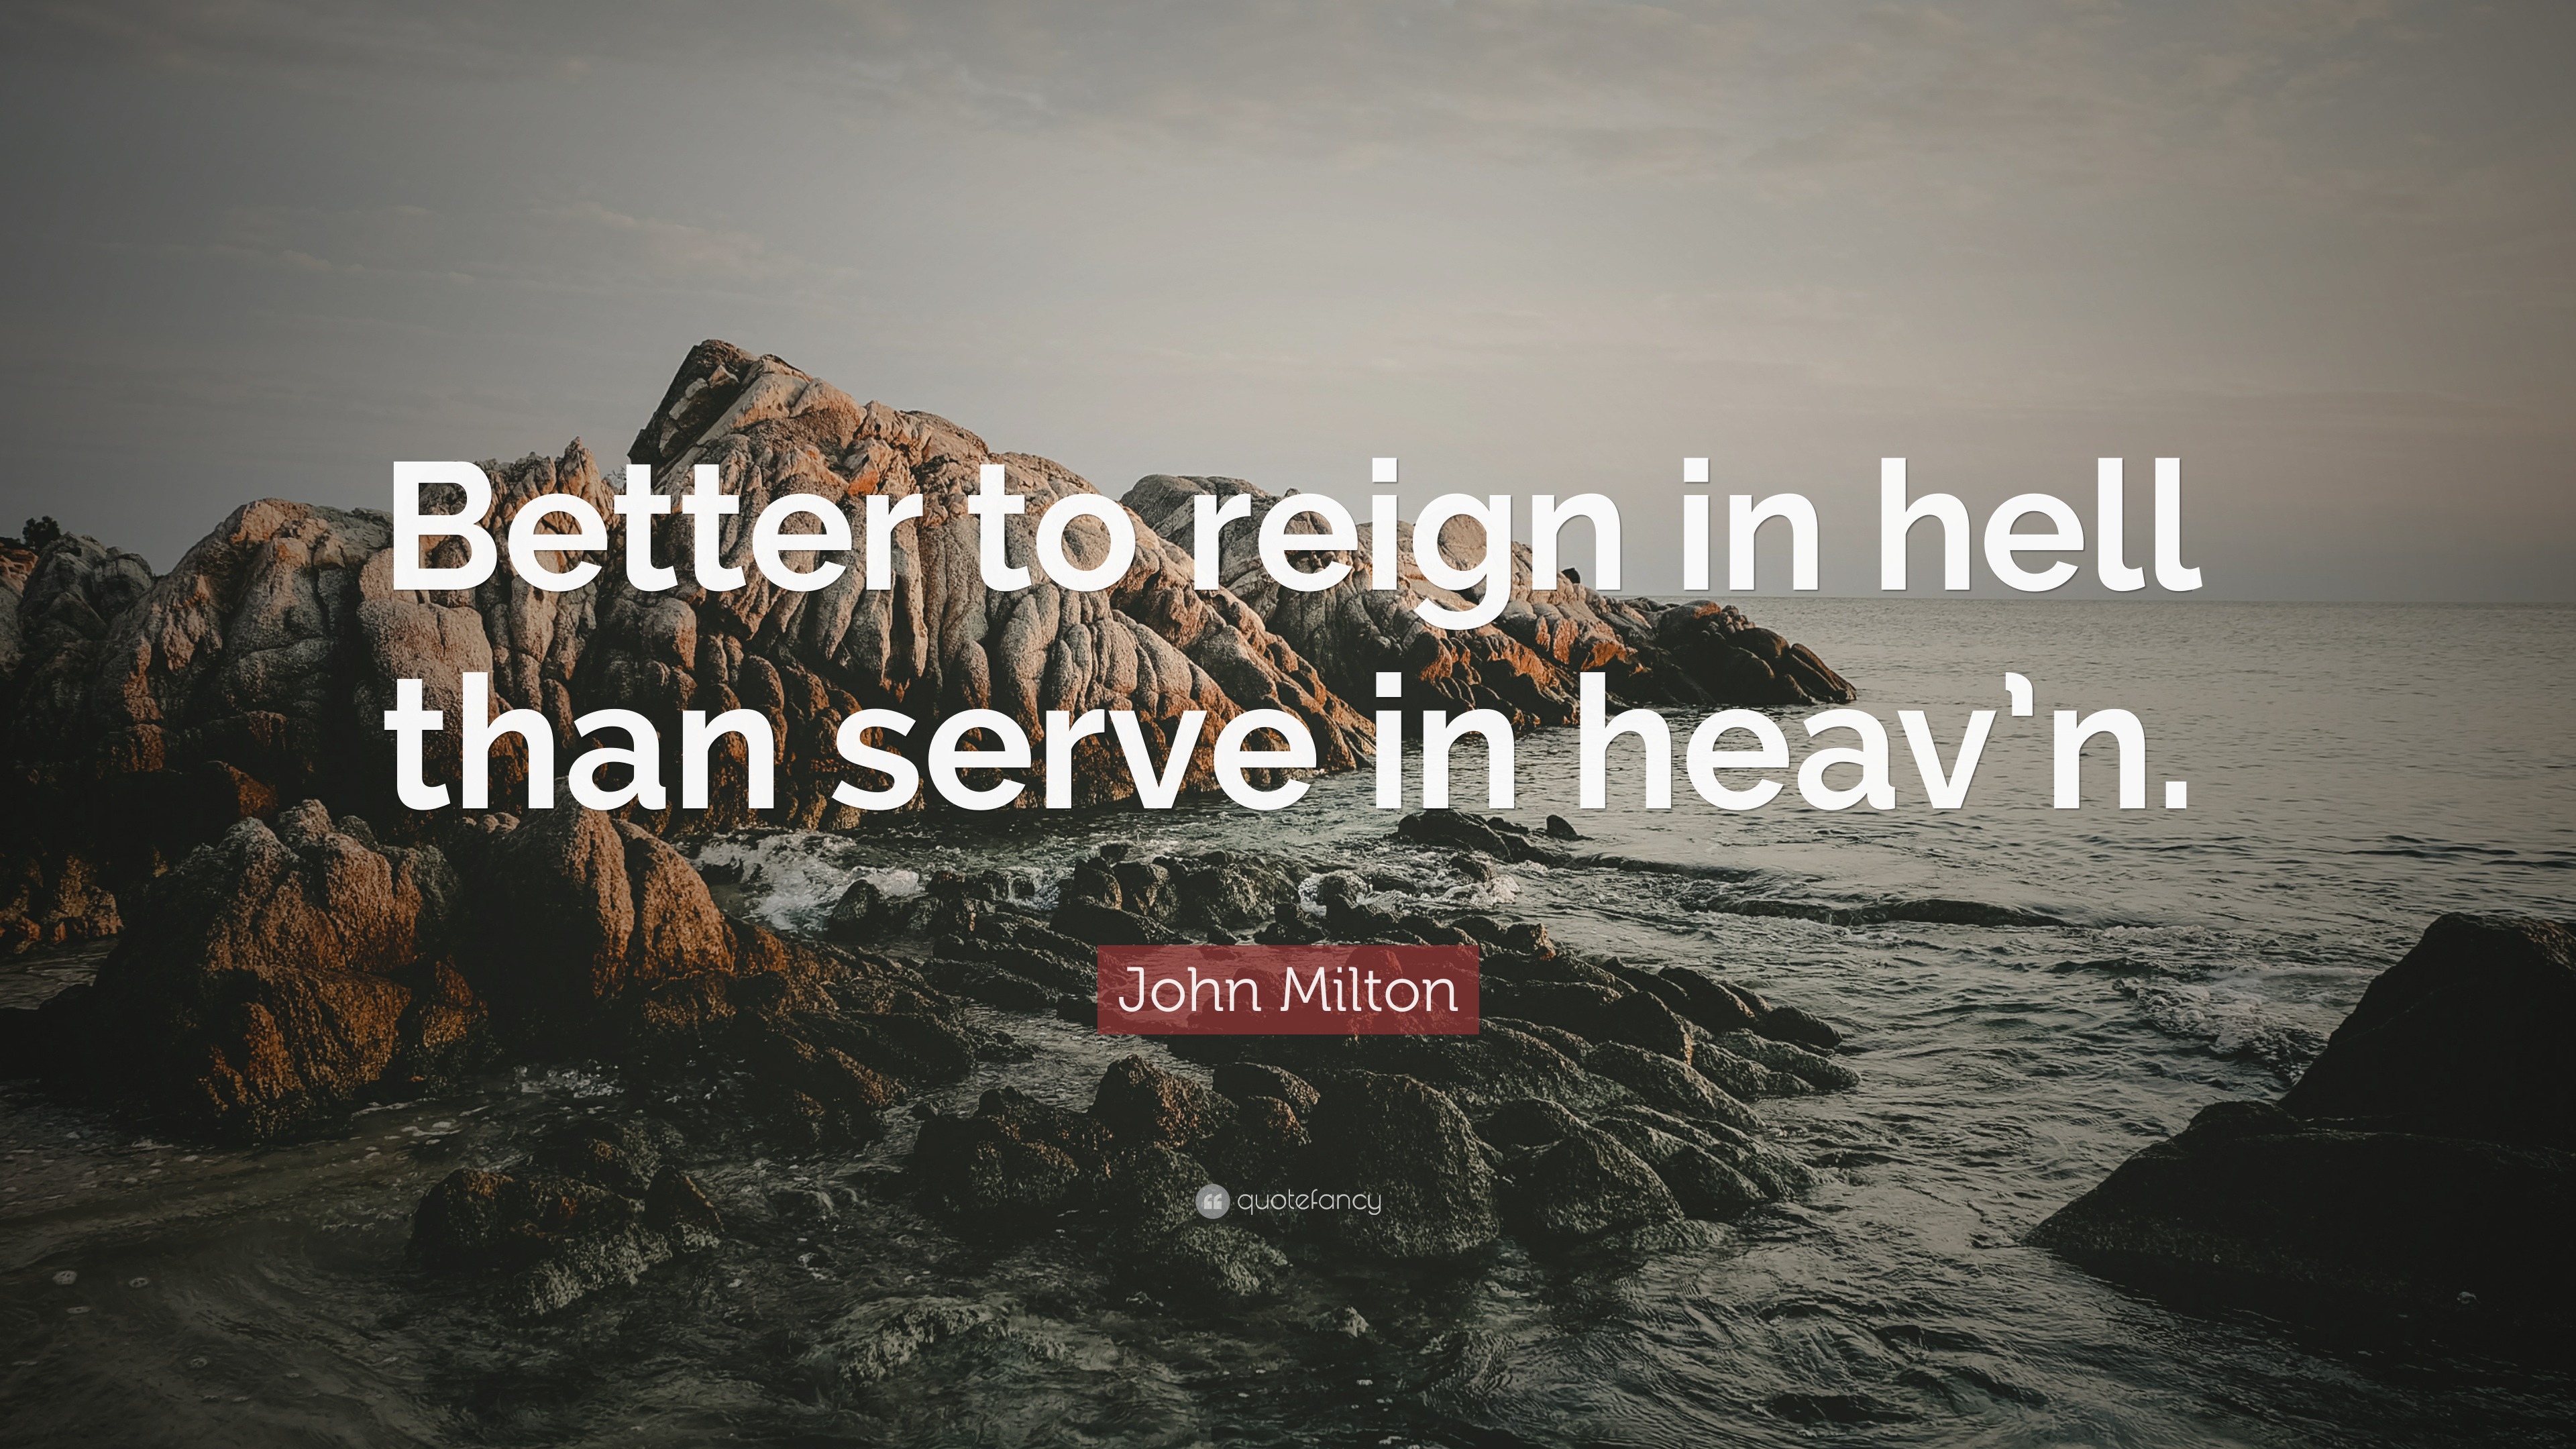 John Milton Quote: "Better to reign in hell than serve in ...